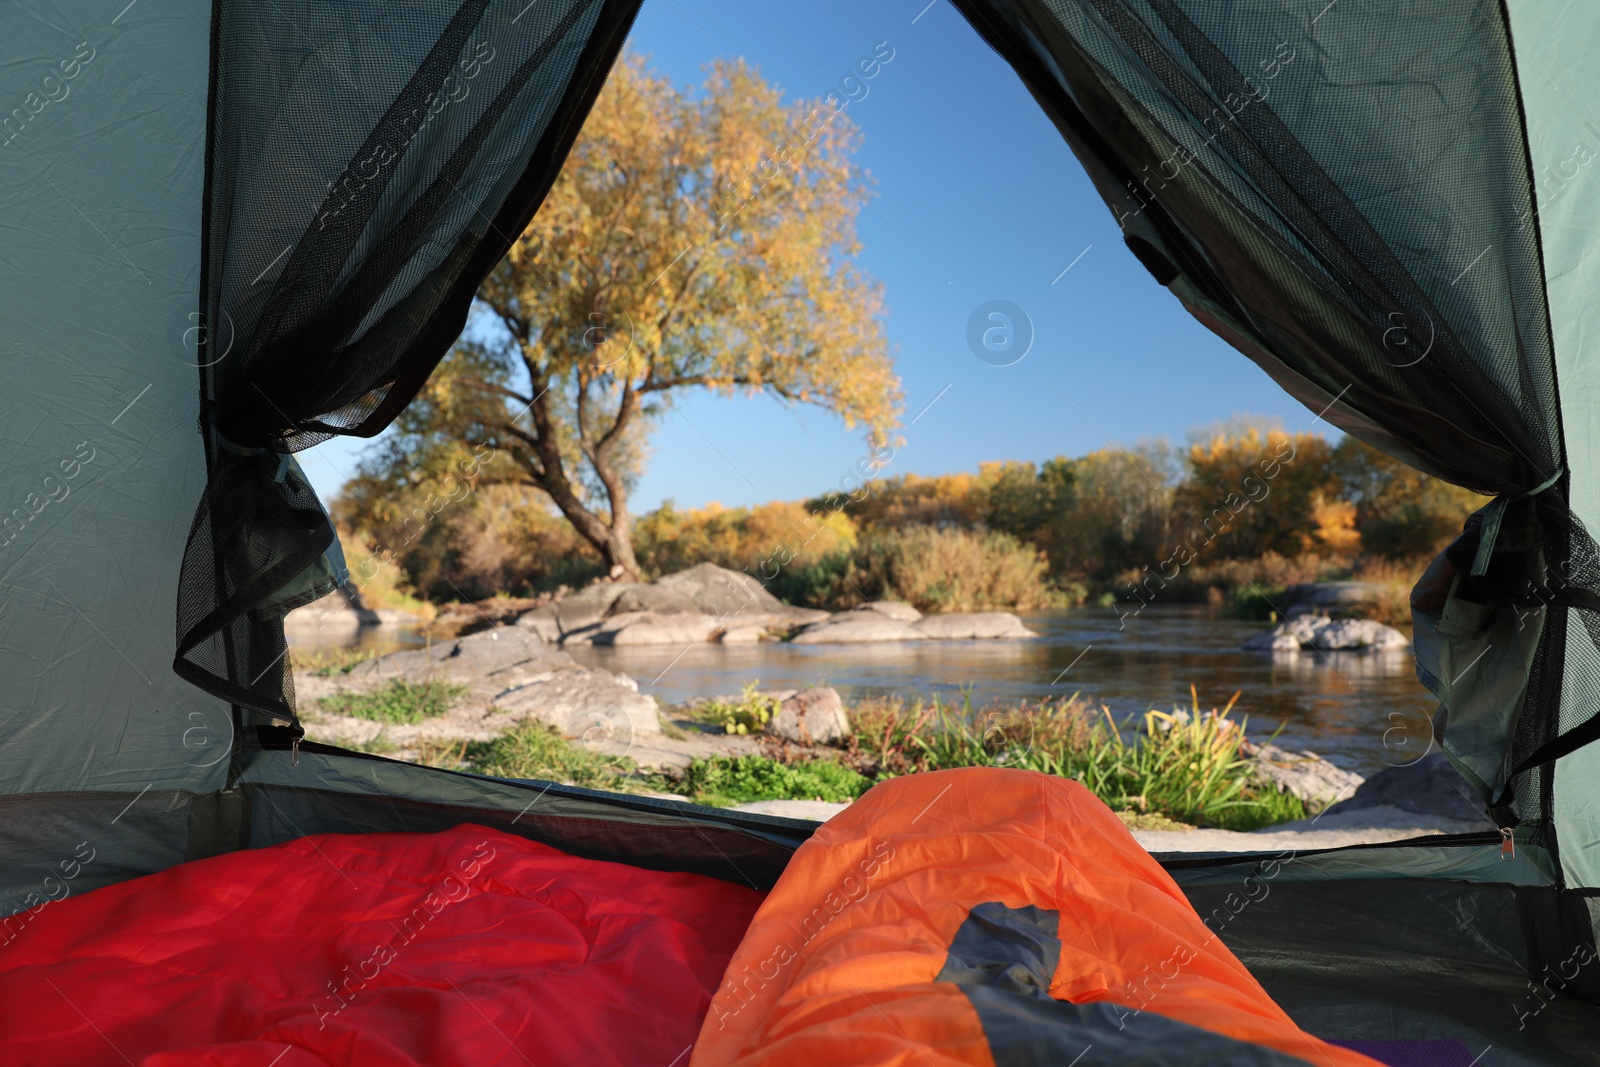 Photo of Camping tent with sleeping bags in wilderness, view from inside